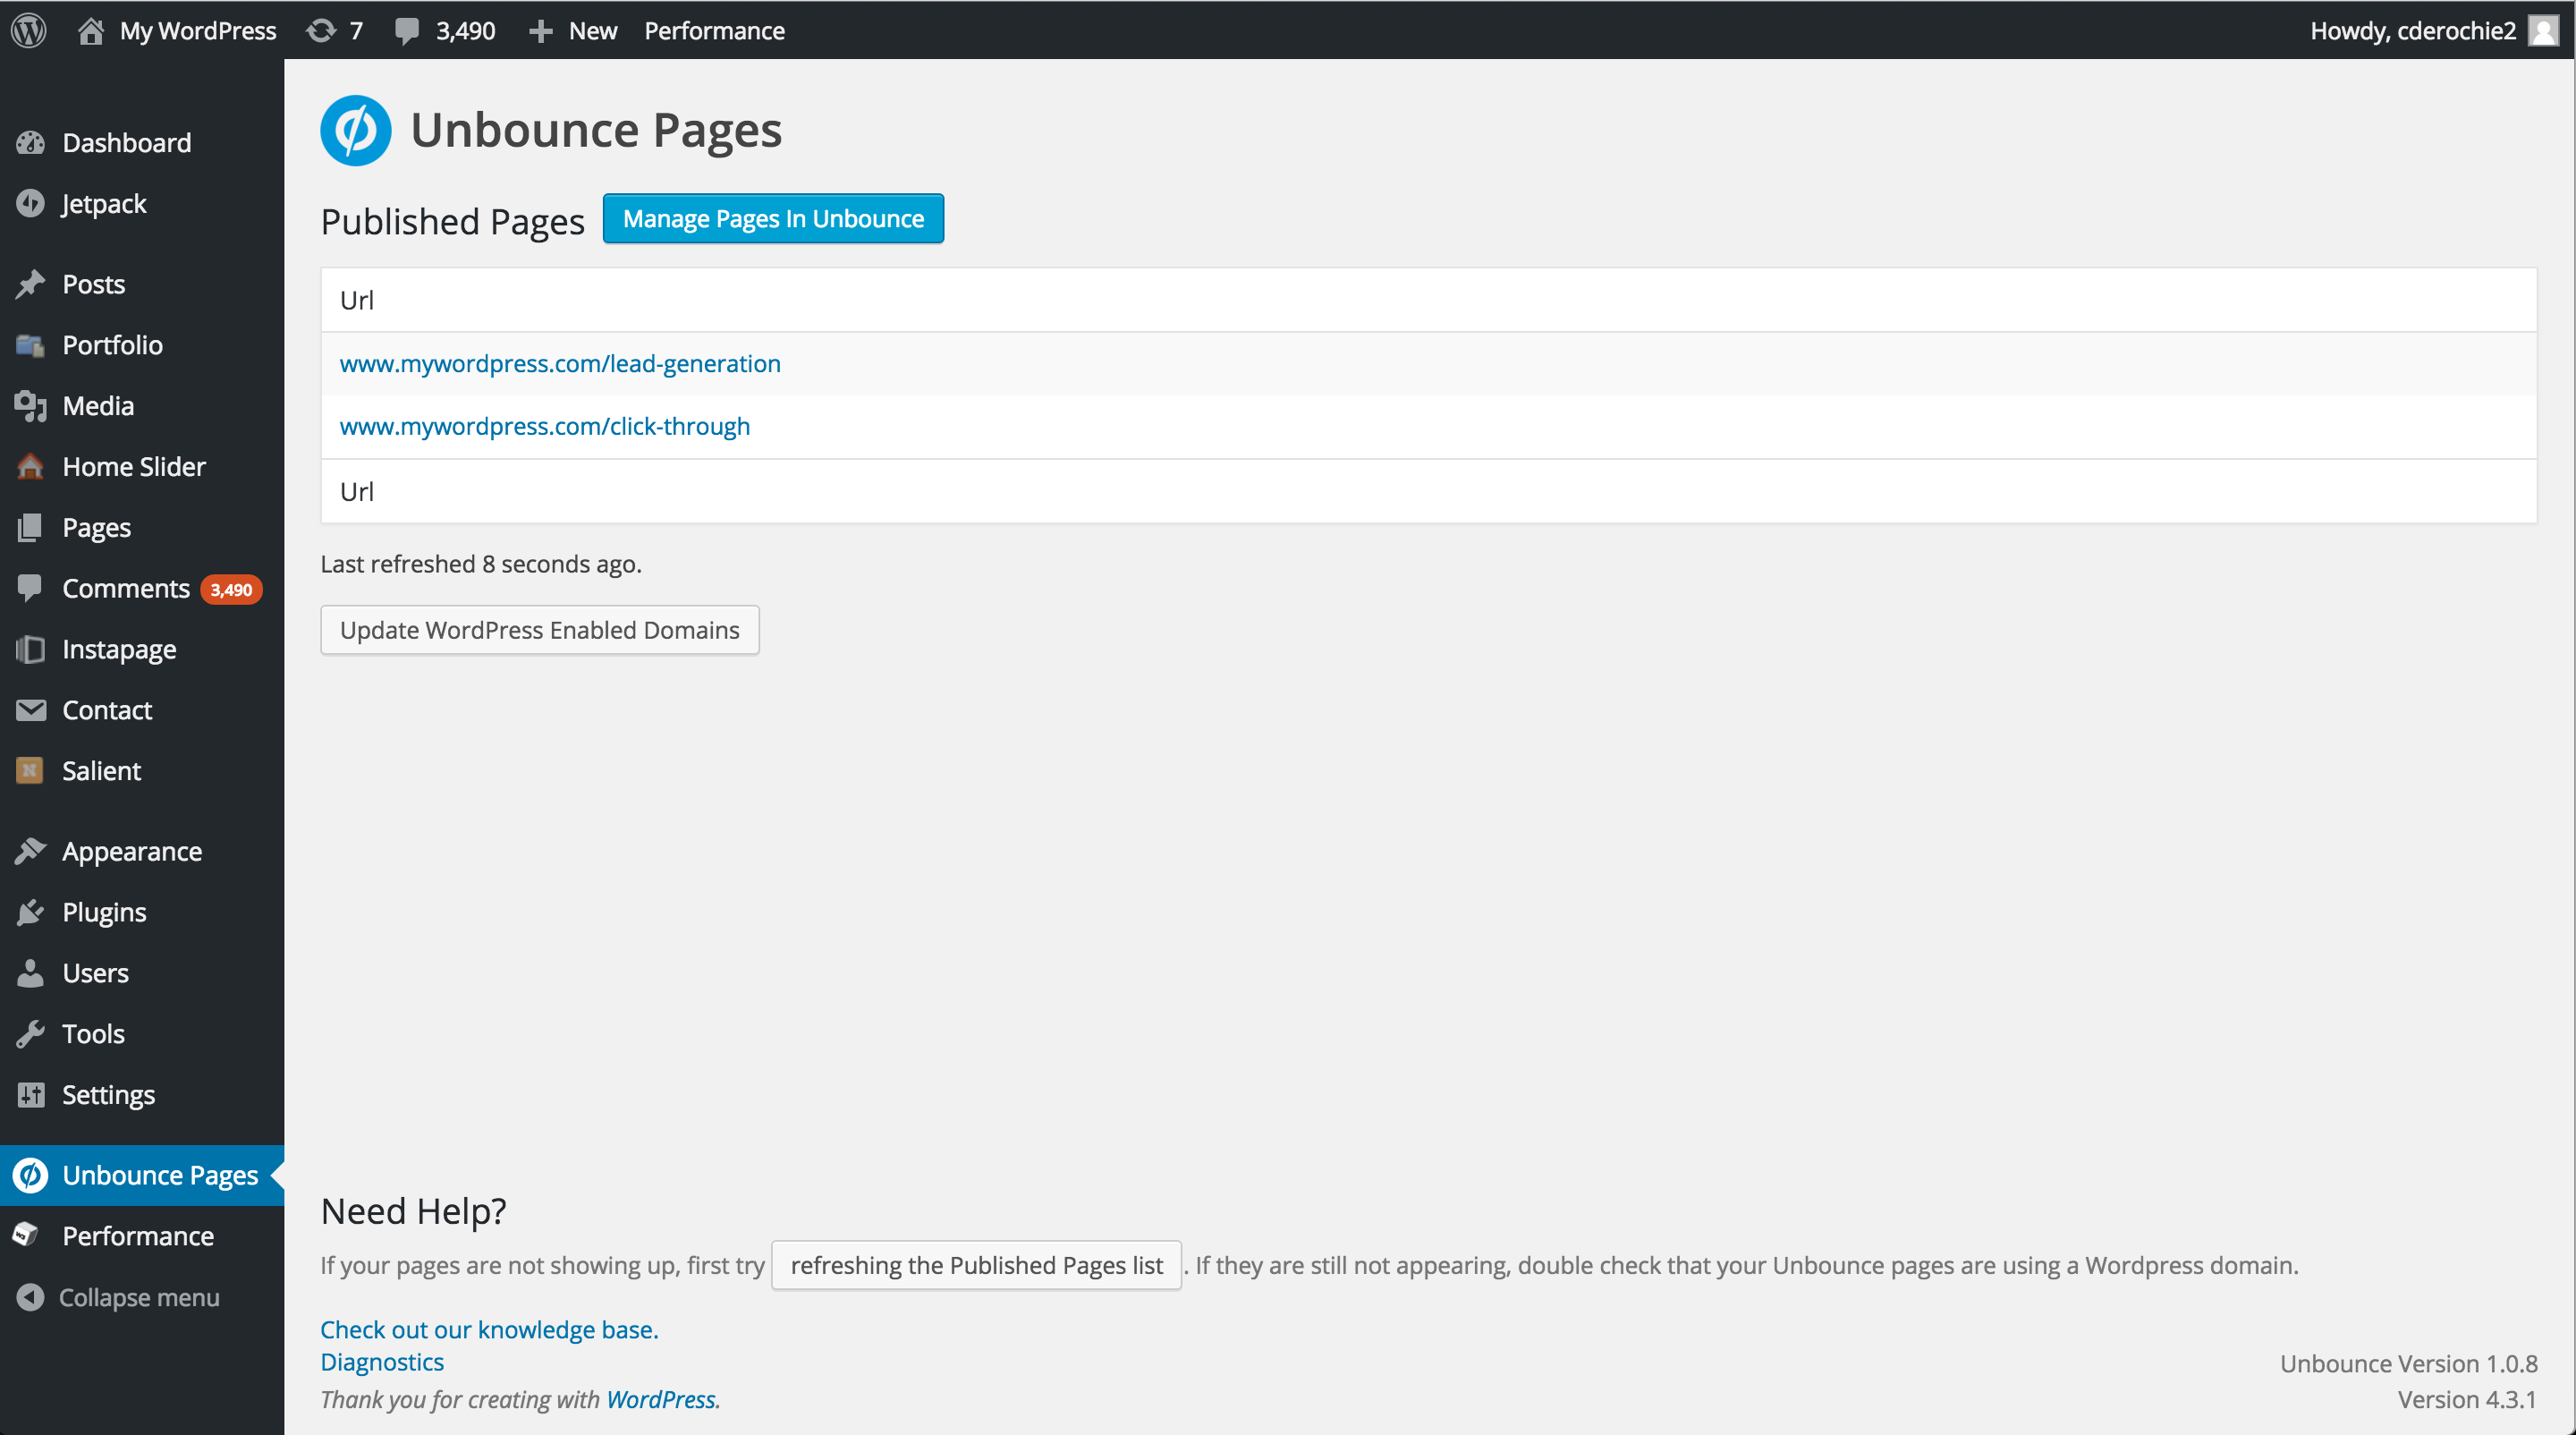 View all of your WordPress landing pages in the plugin’s interface and easily manage them in Unbounce.